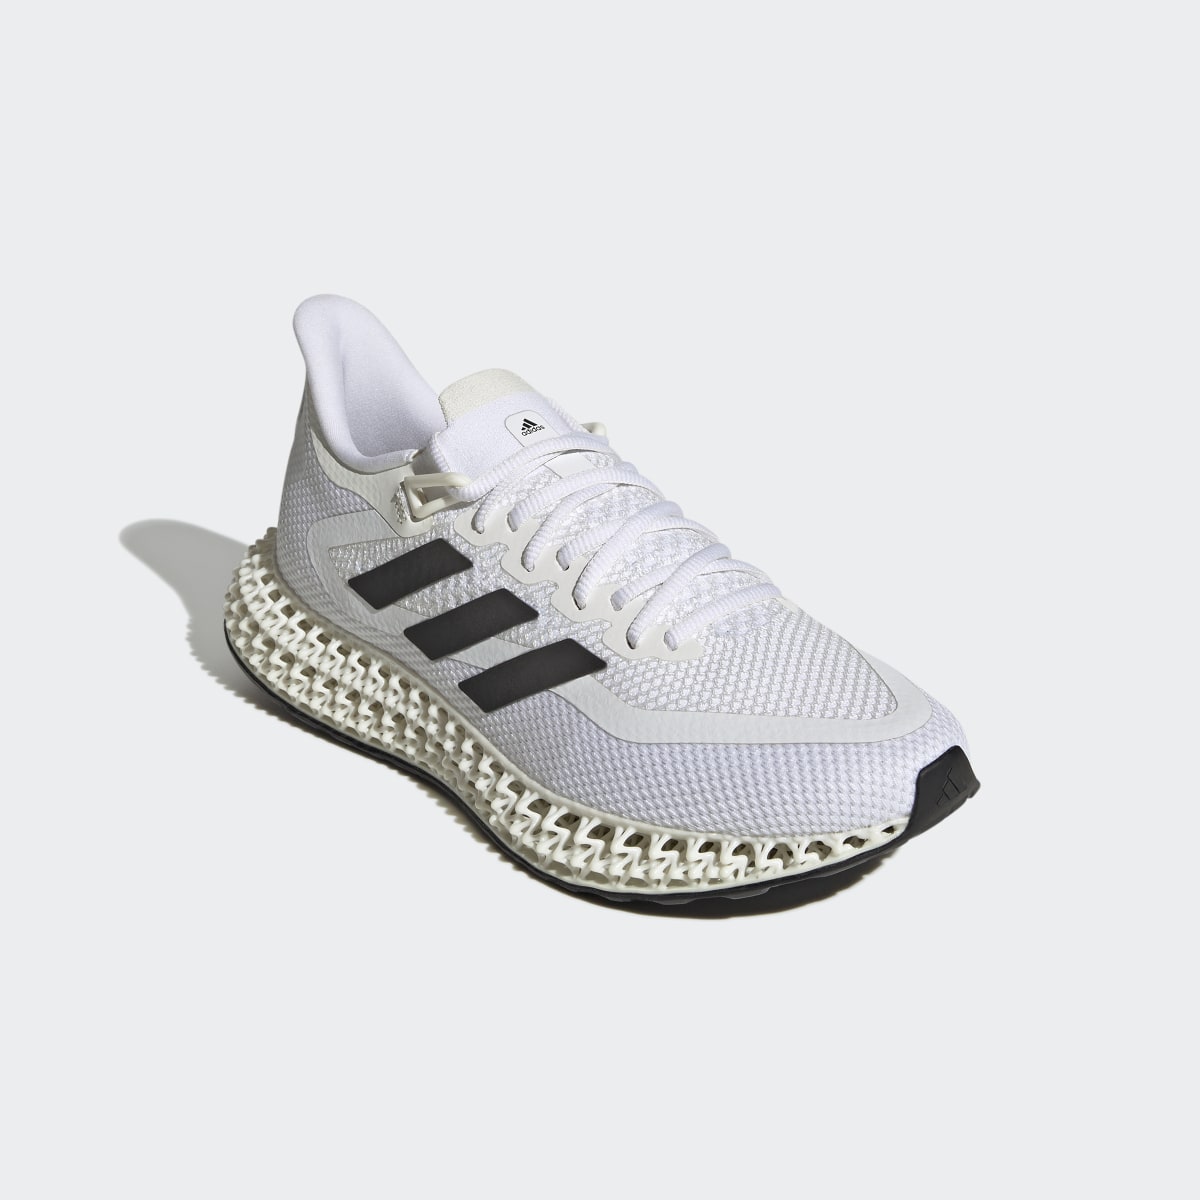 Adidas 4DFWD 2 Running Shoes. 8